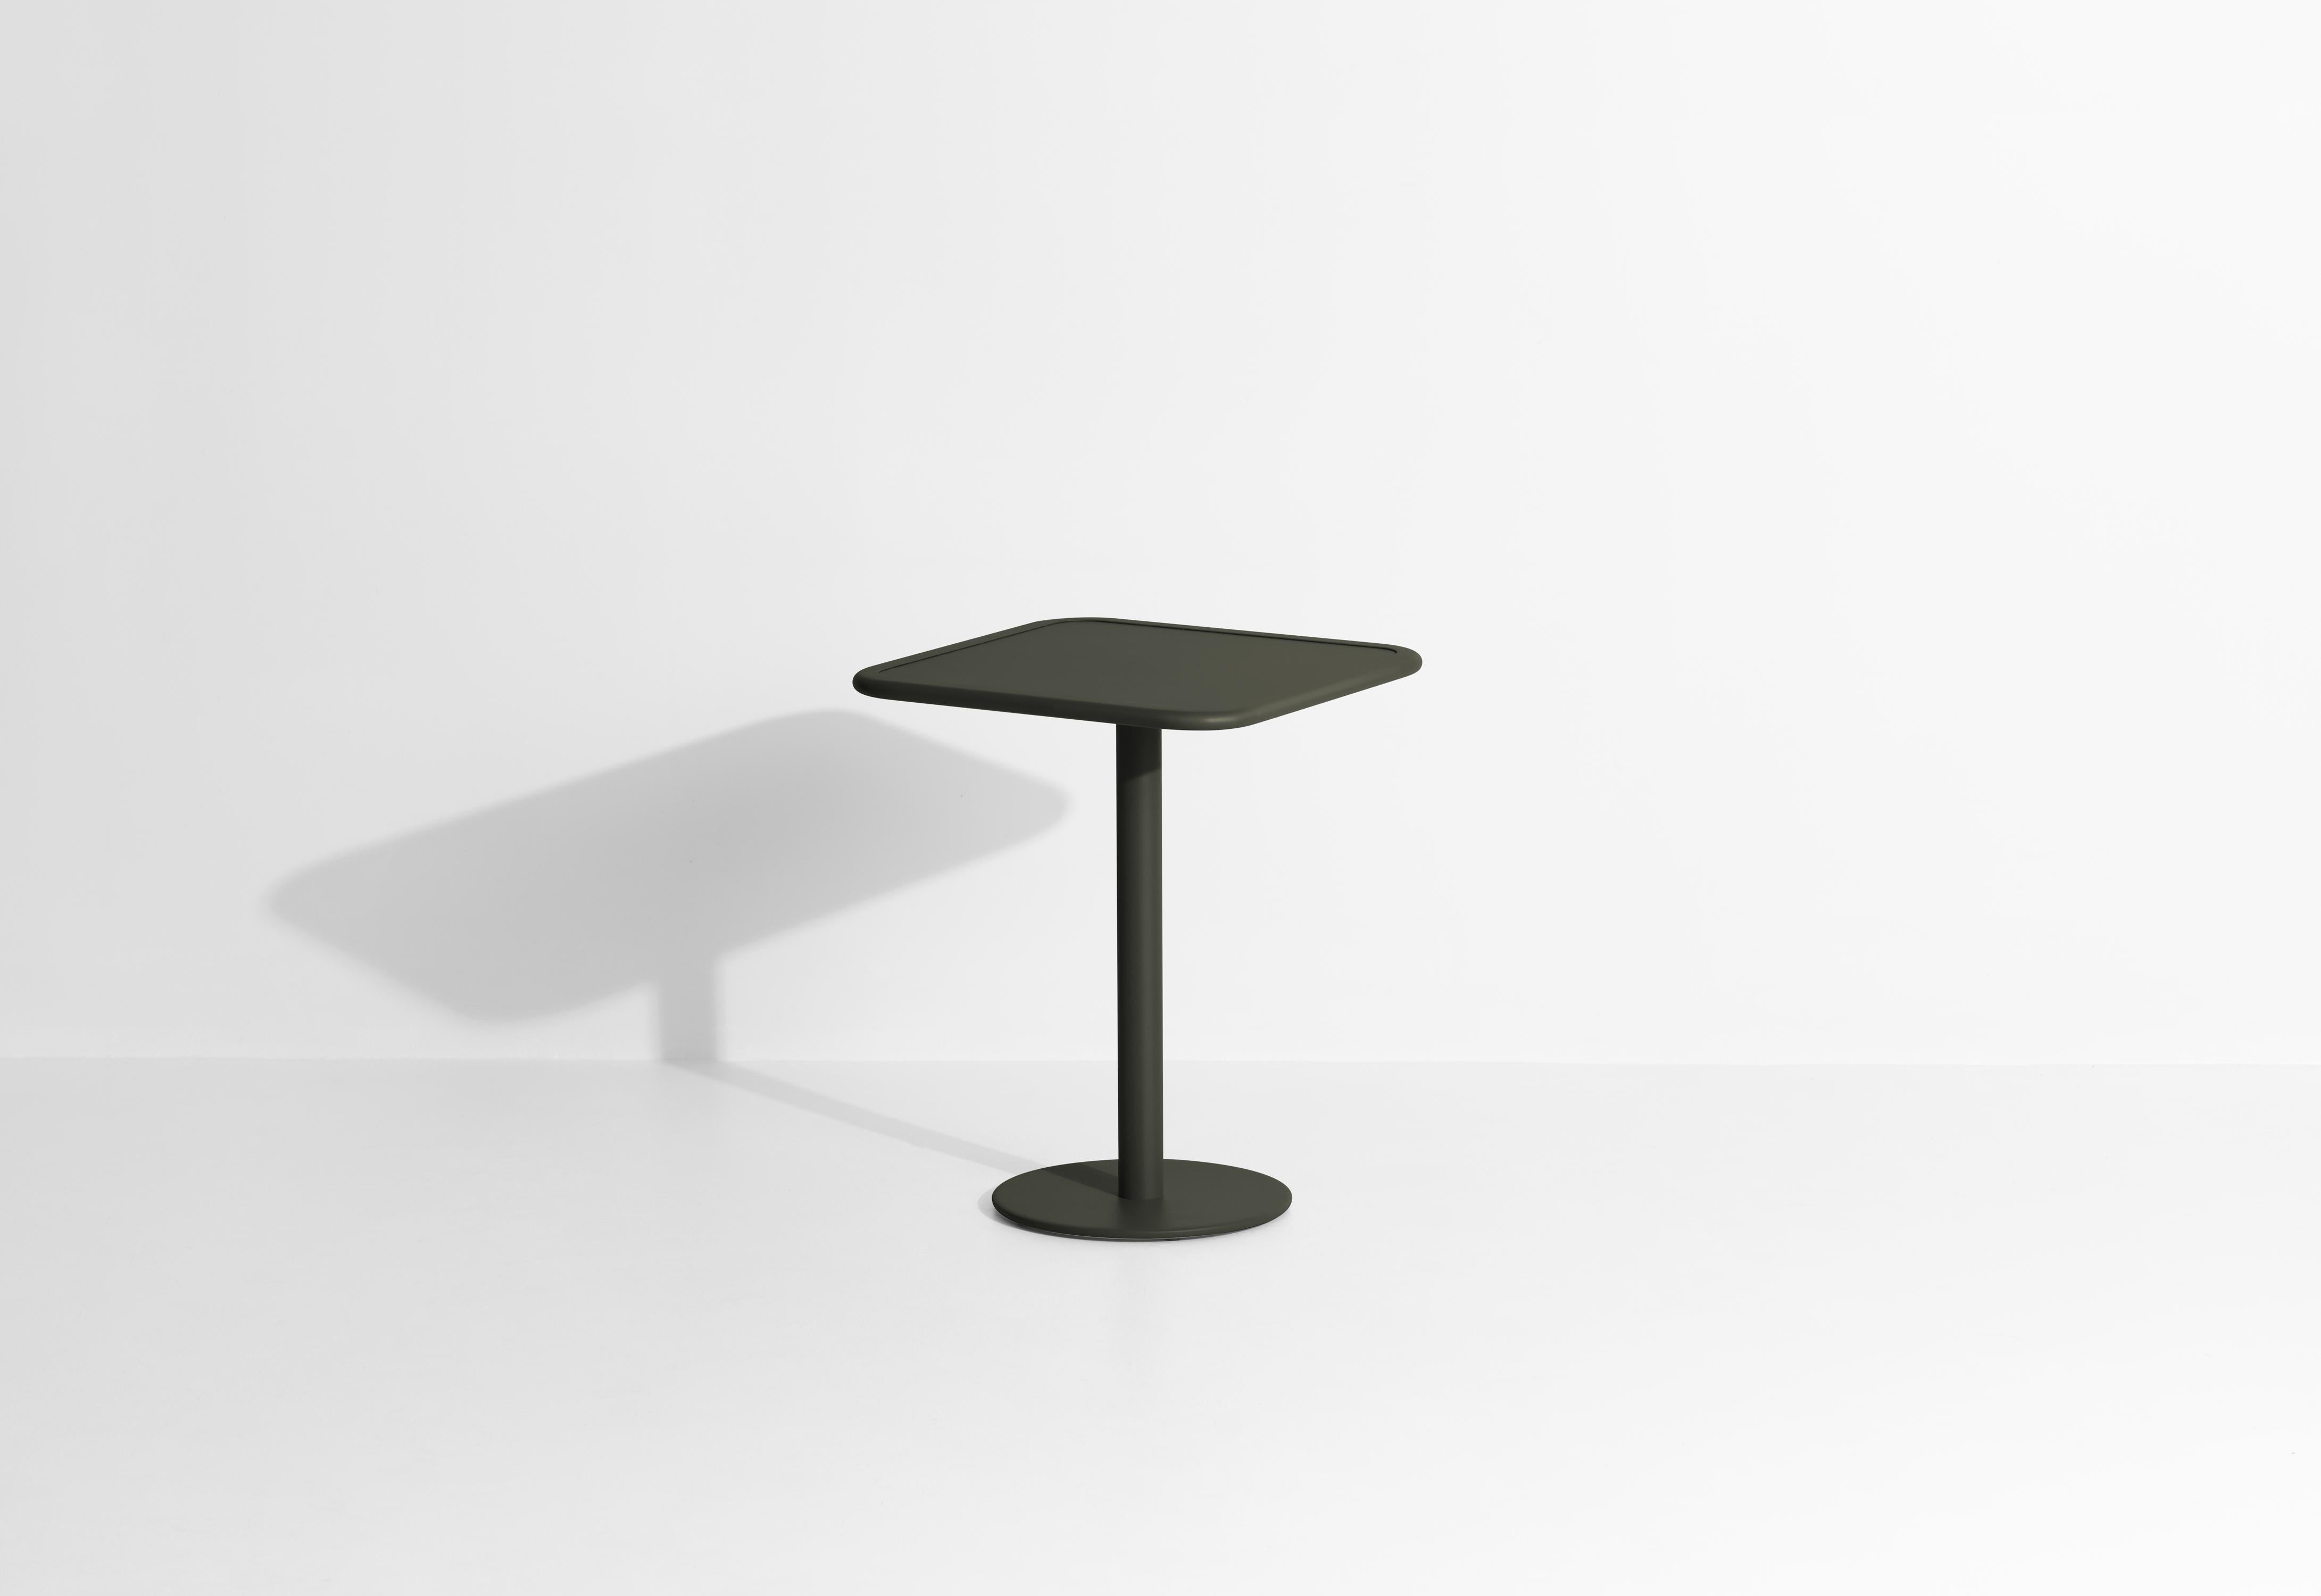 Chinese Petite Friture Week-End Bistro Square Dining Table in Glass Green Aluminium For Sale